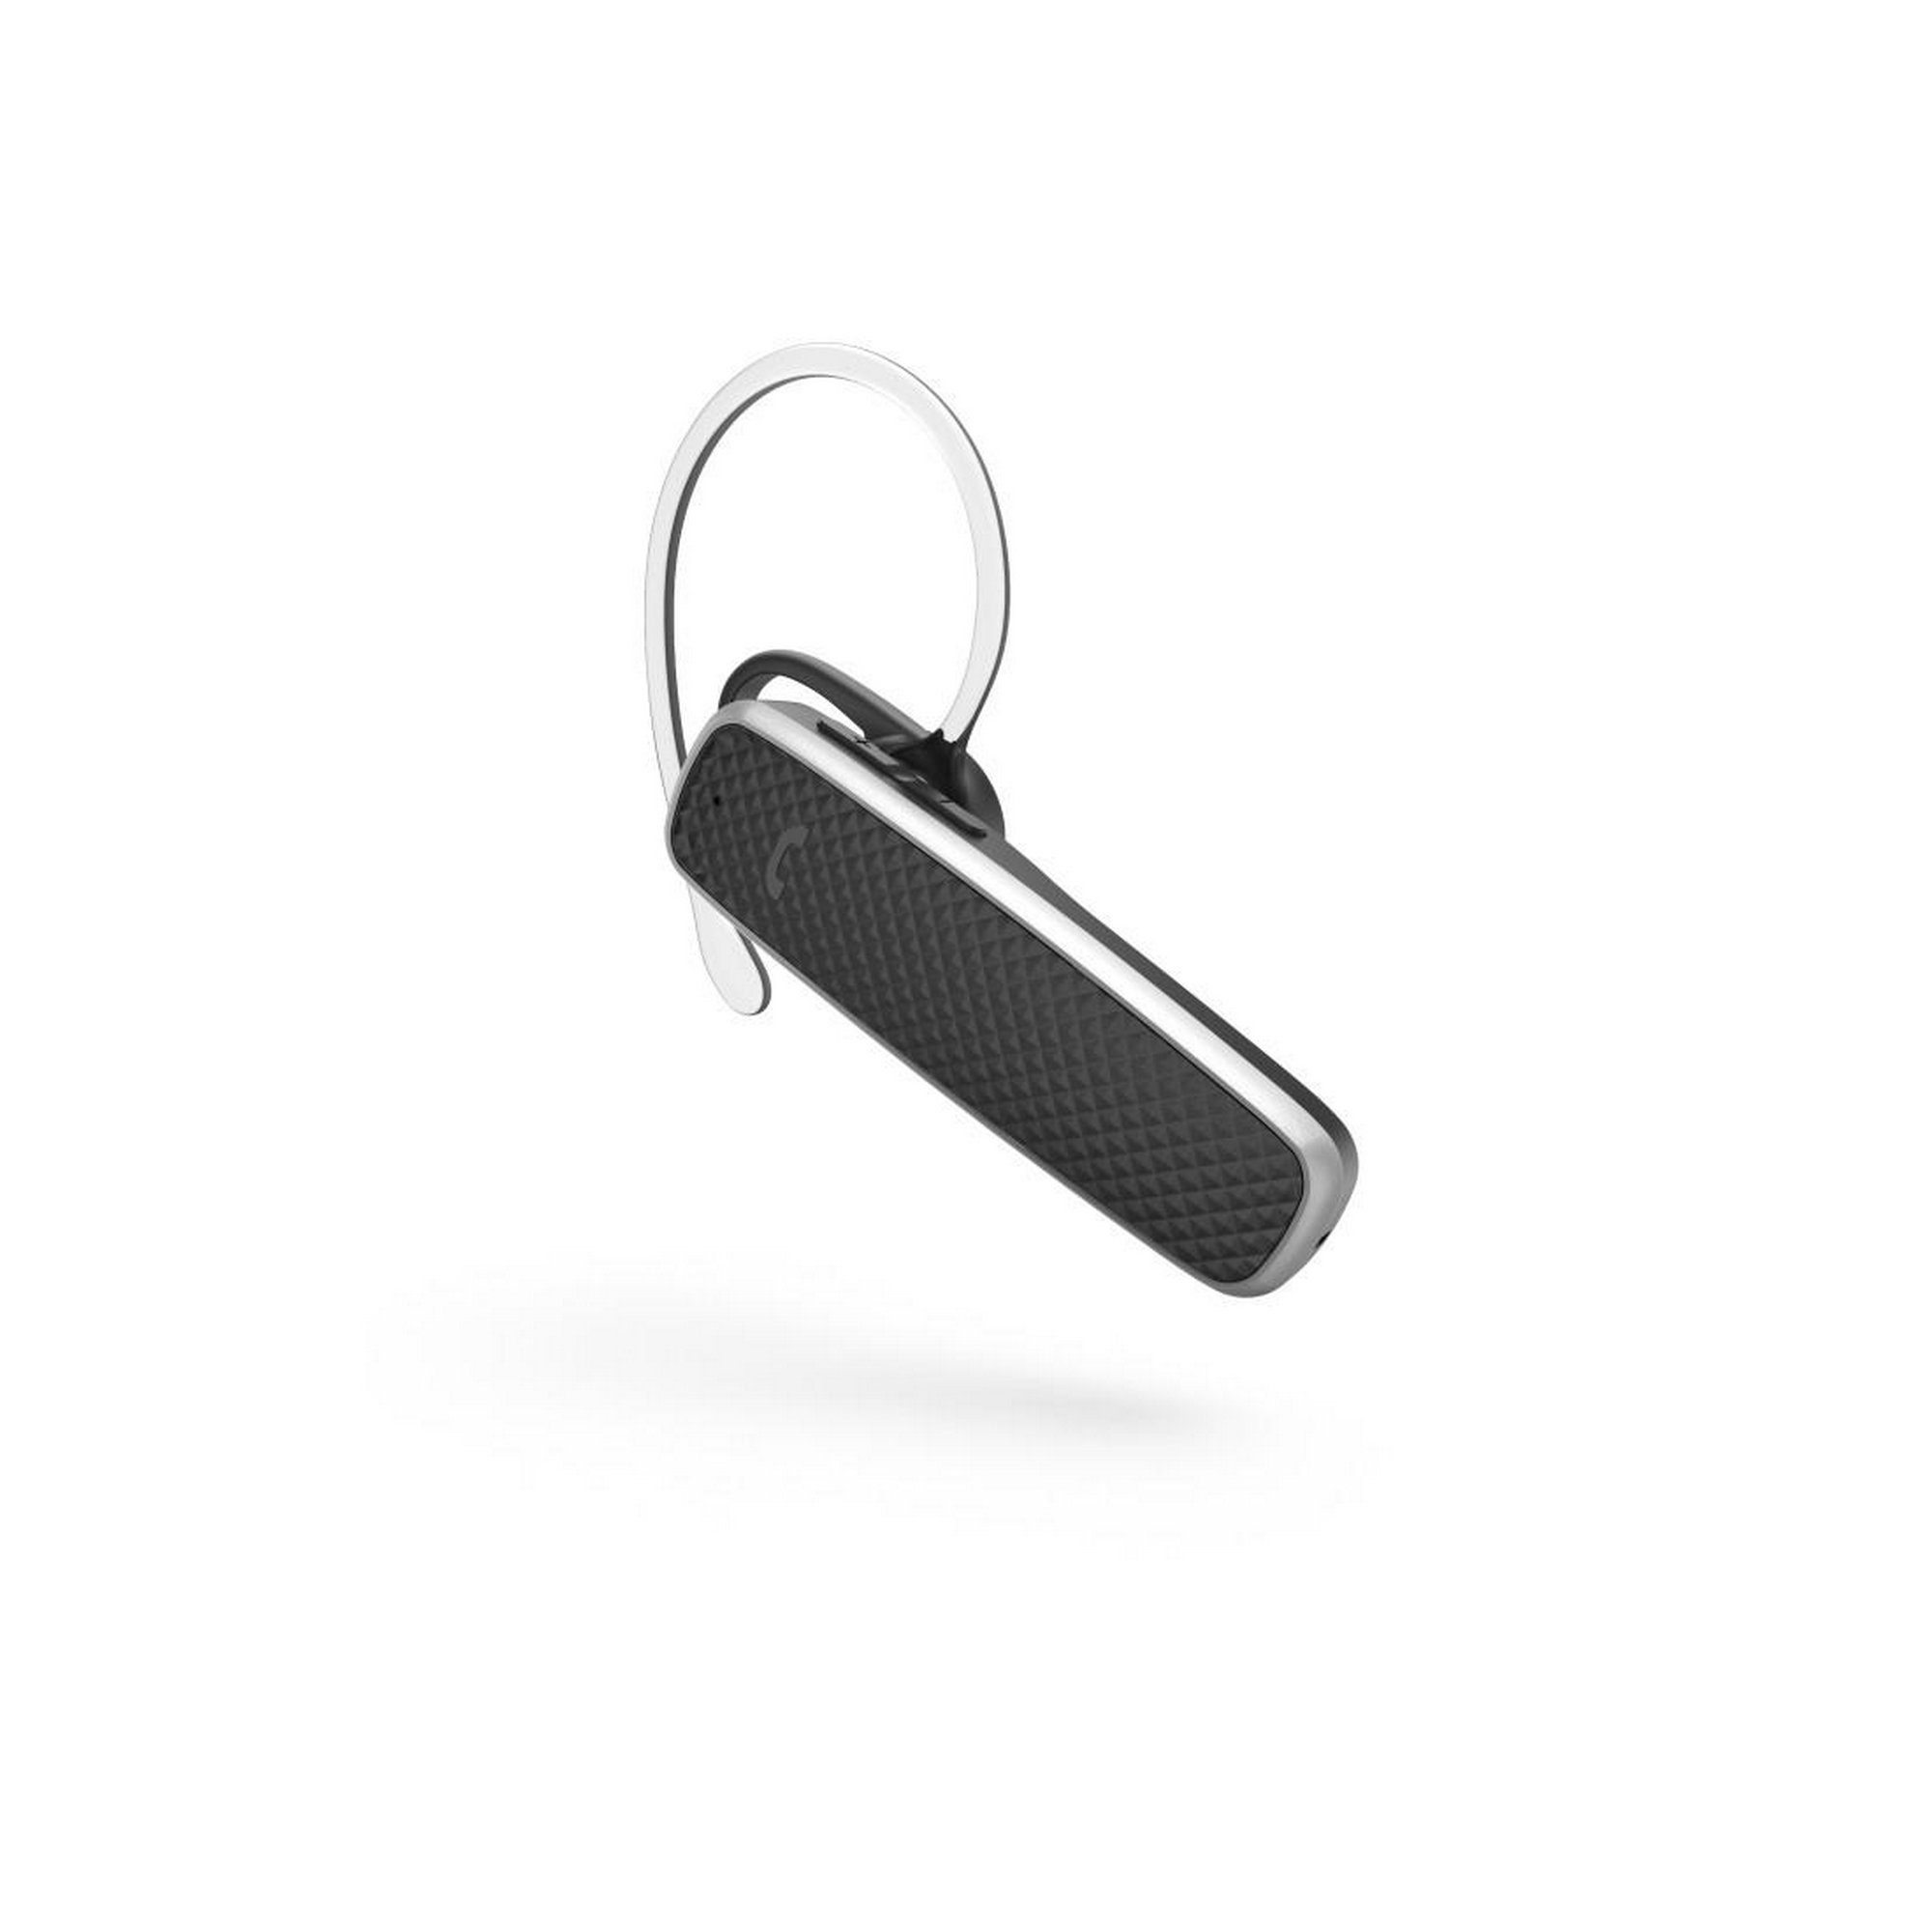 Bluetooth-Headset 'MyVoice700' + product picture